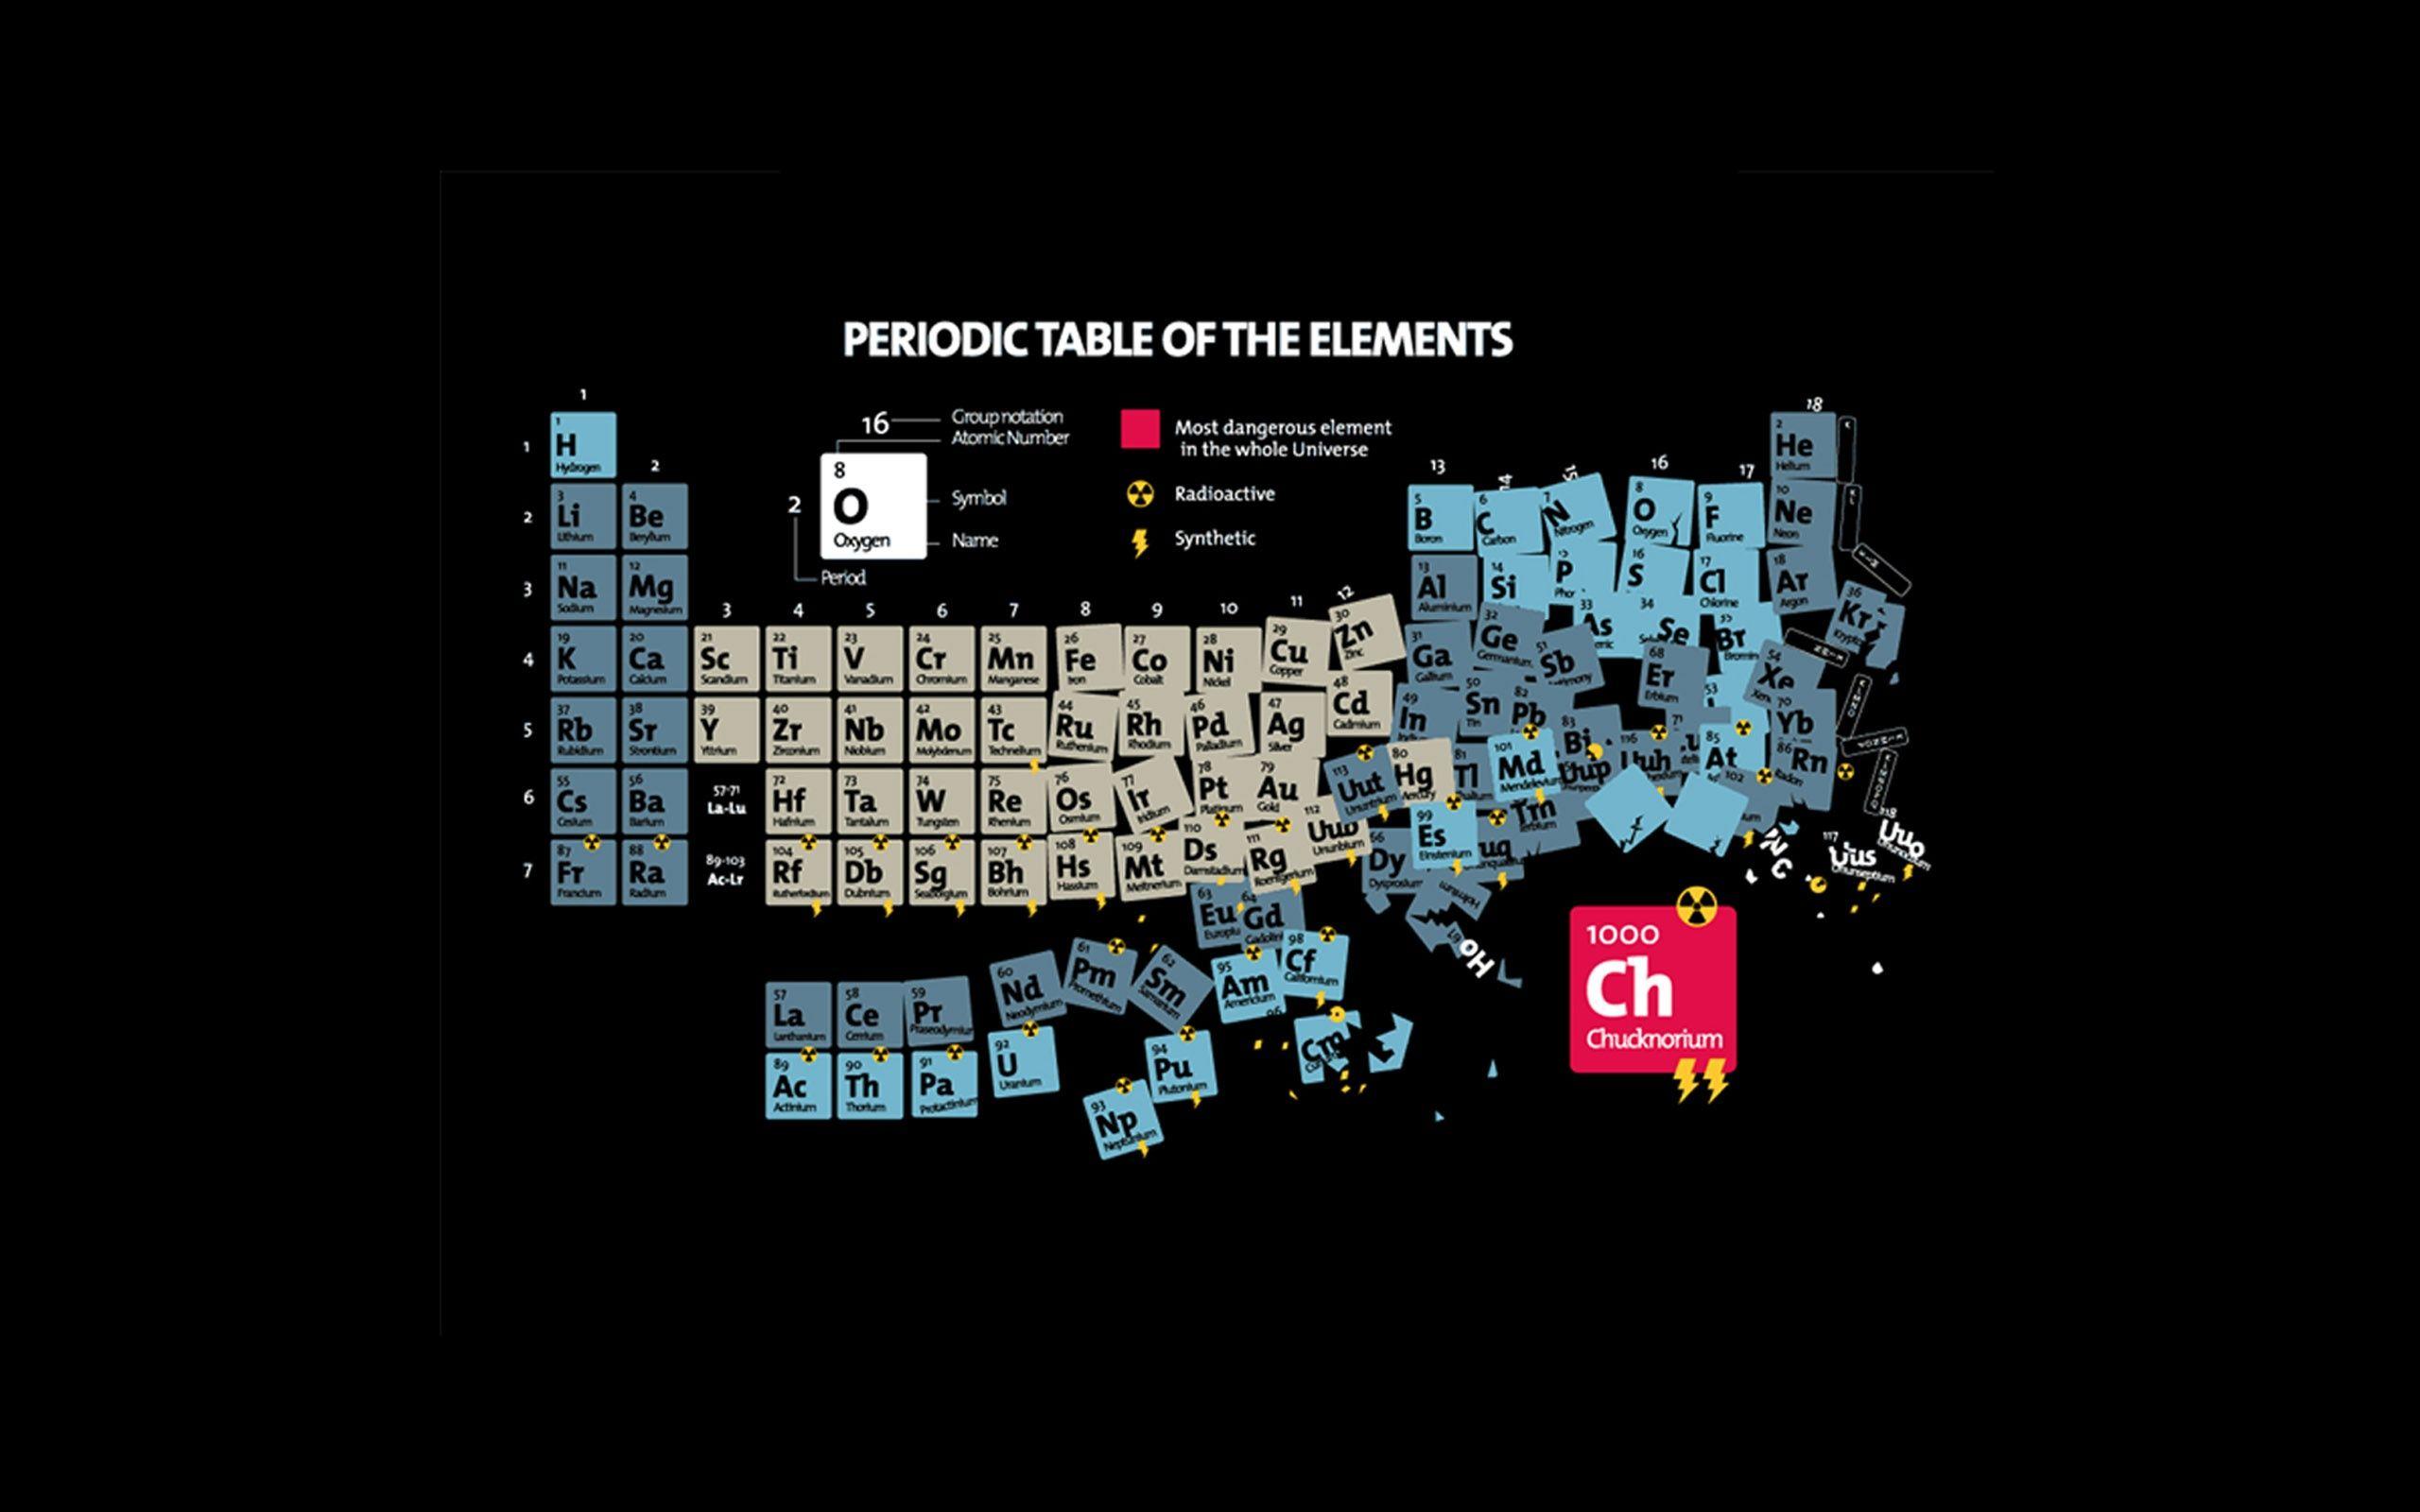 Periodic Table of Elements wallpaper. Periodic Table of Elements